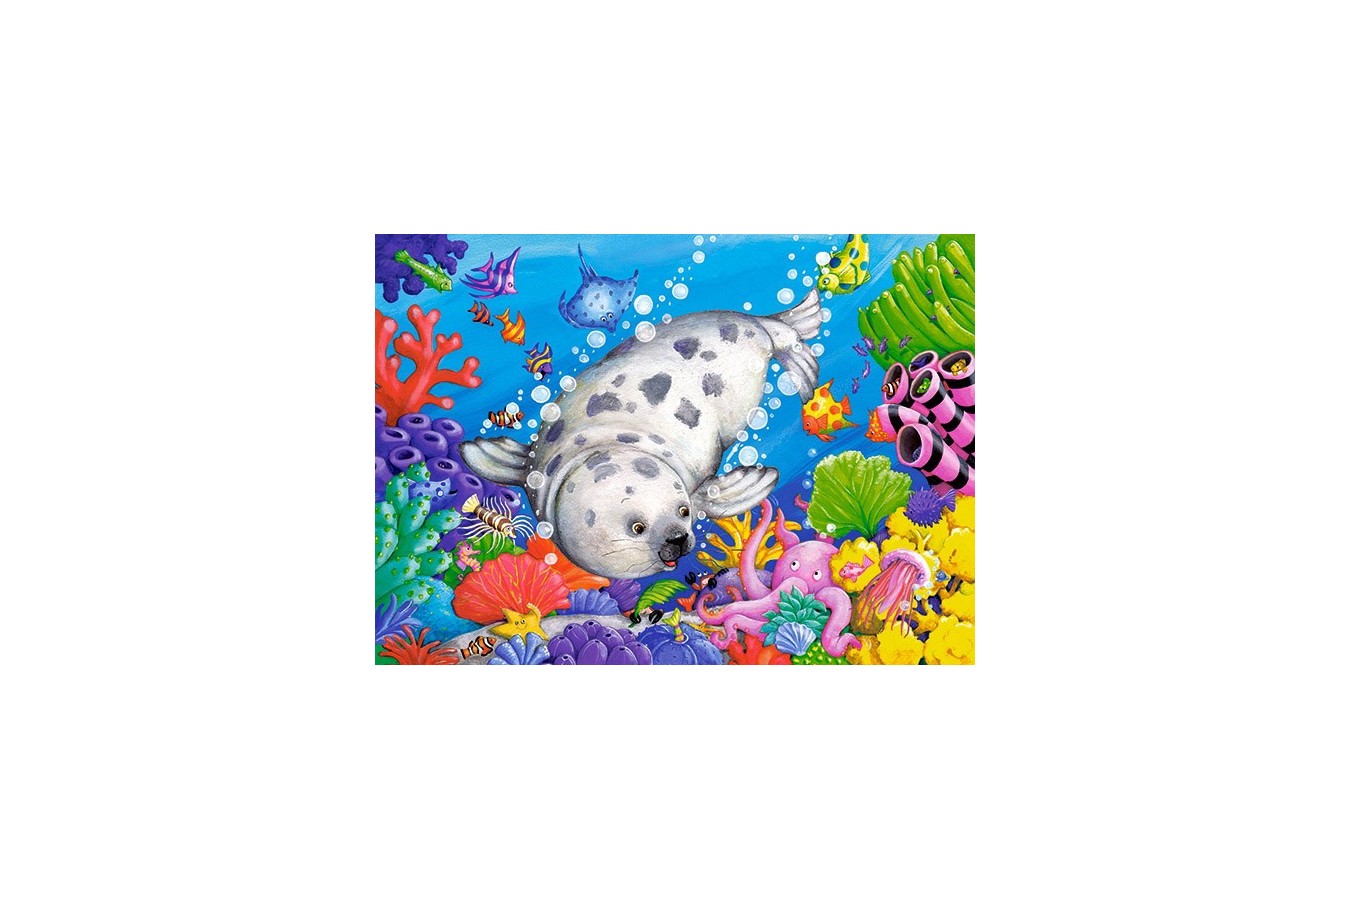 Puzzle Castorland - On The Coral Reef, 60 Piese